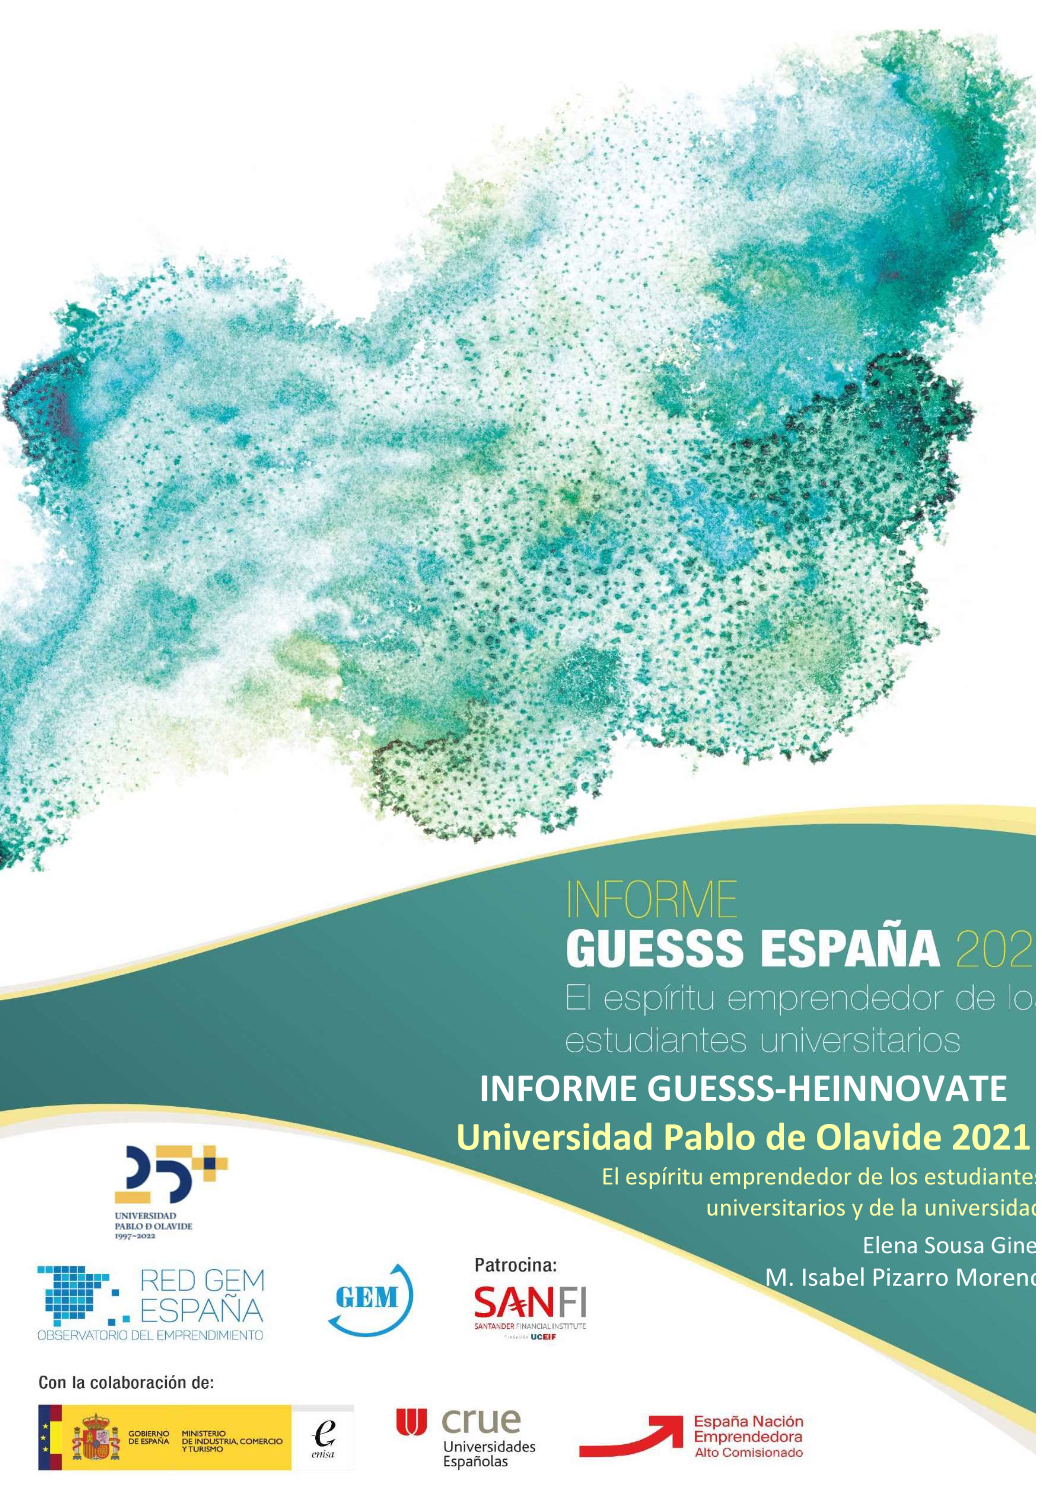 Informe_GUESSS_UPO_2021_2022